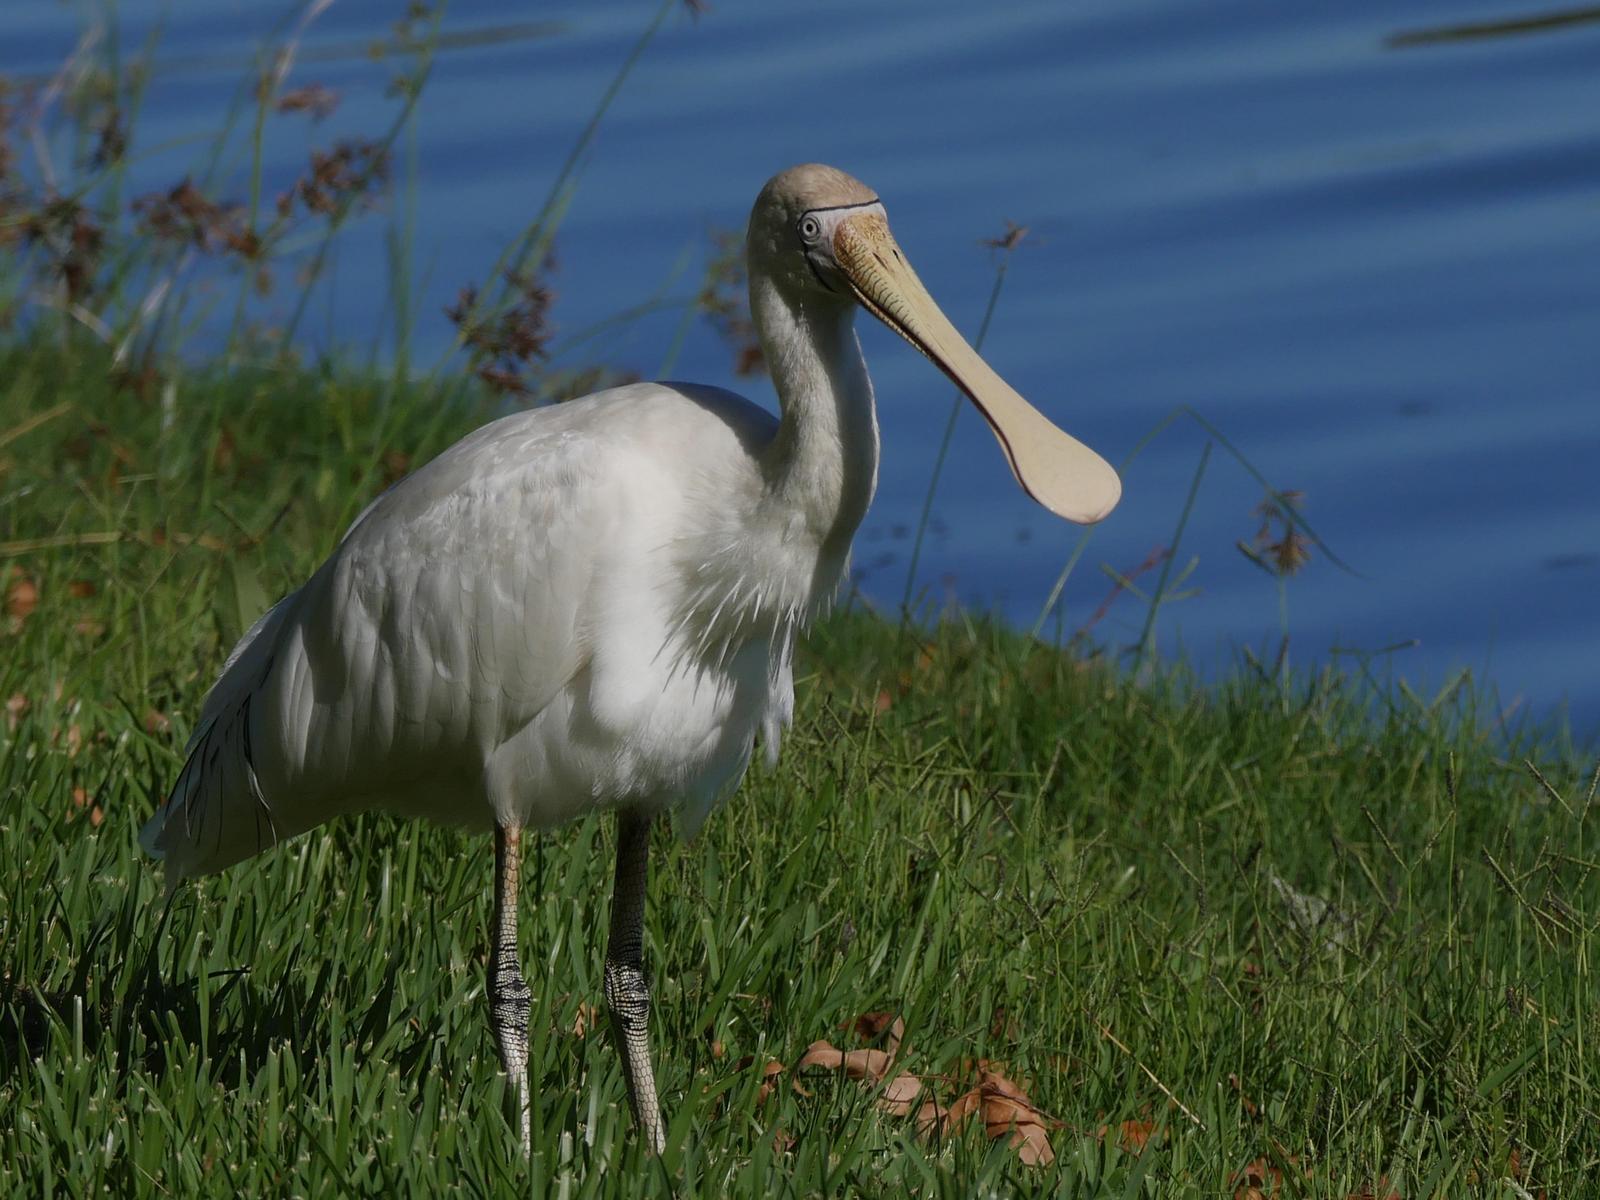 Yellow-billed Spoonbill Photo by Peter Lowe